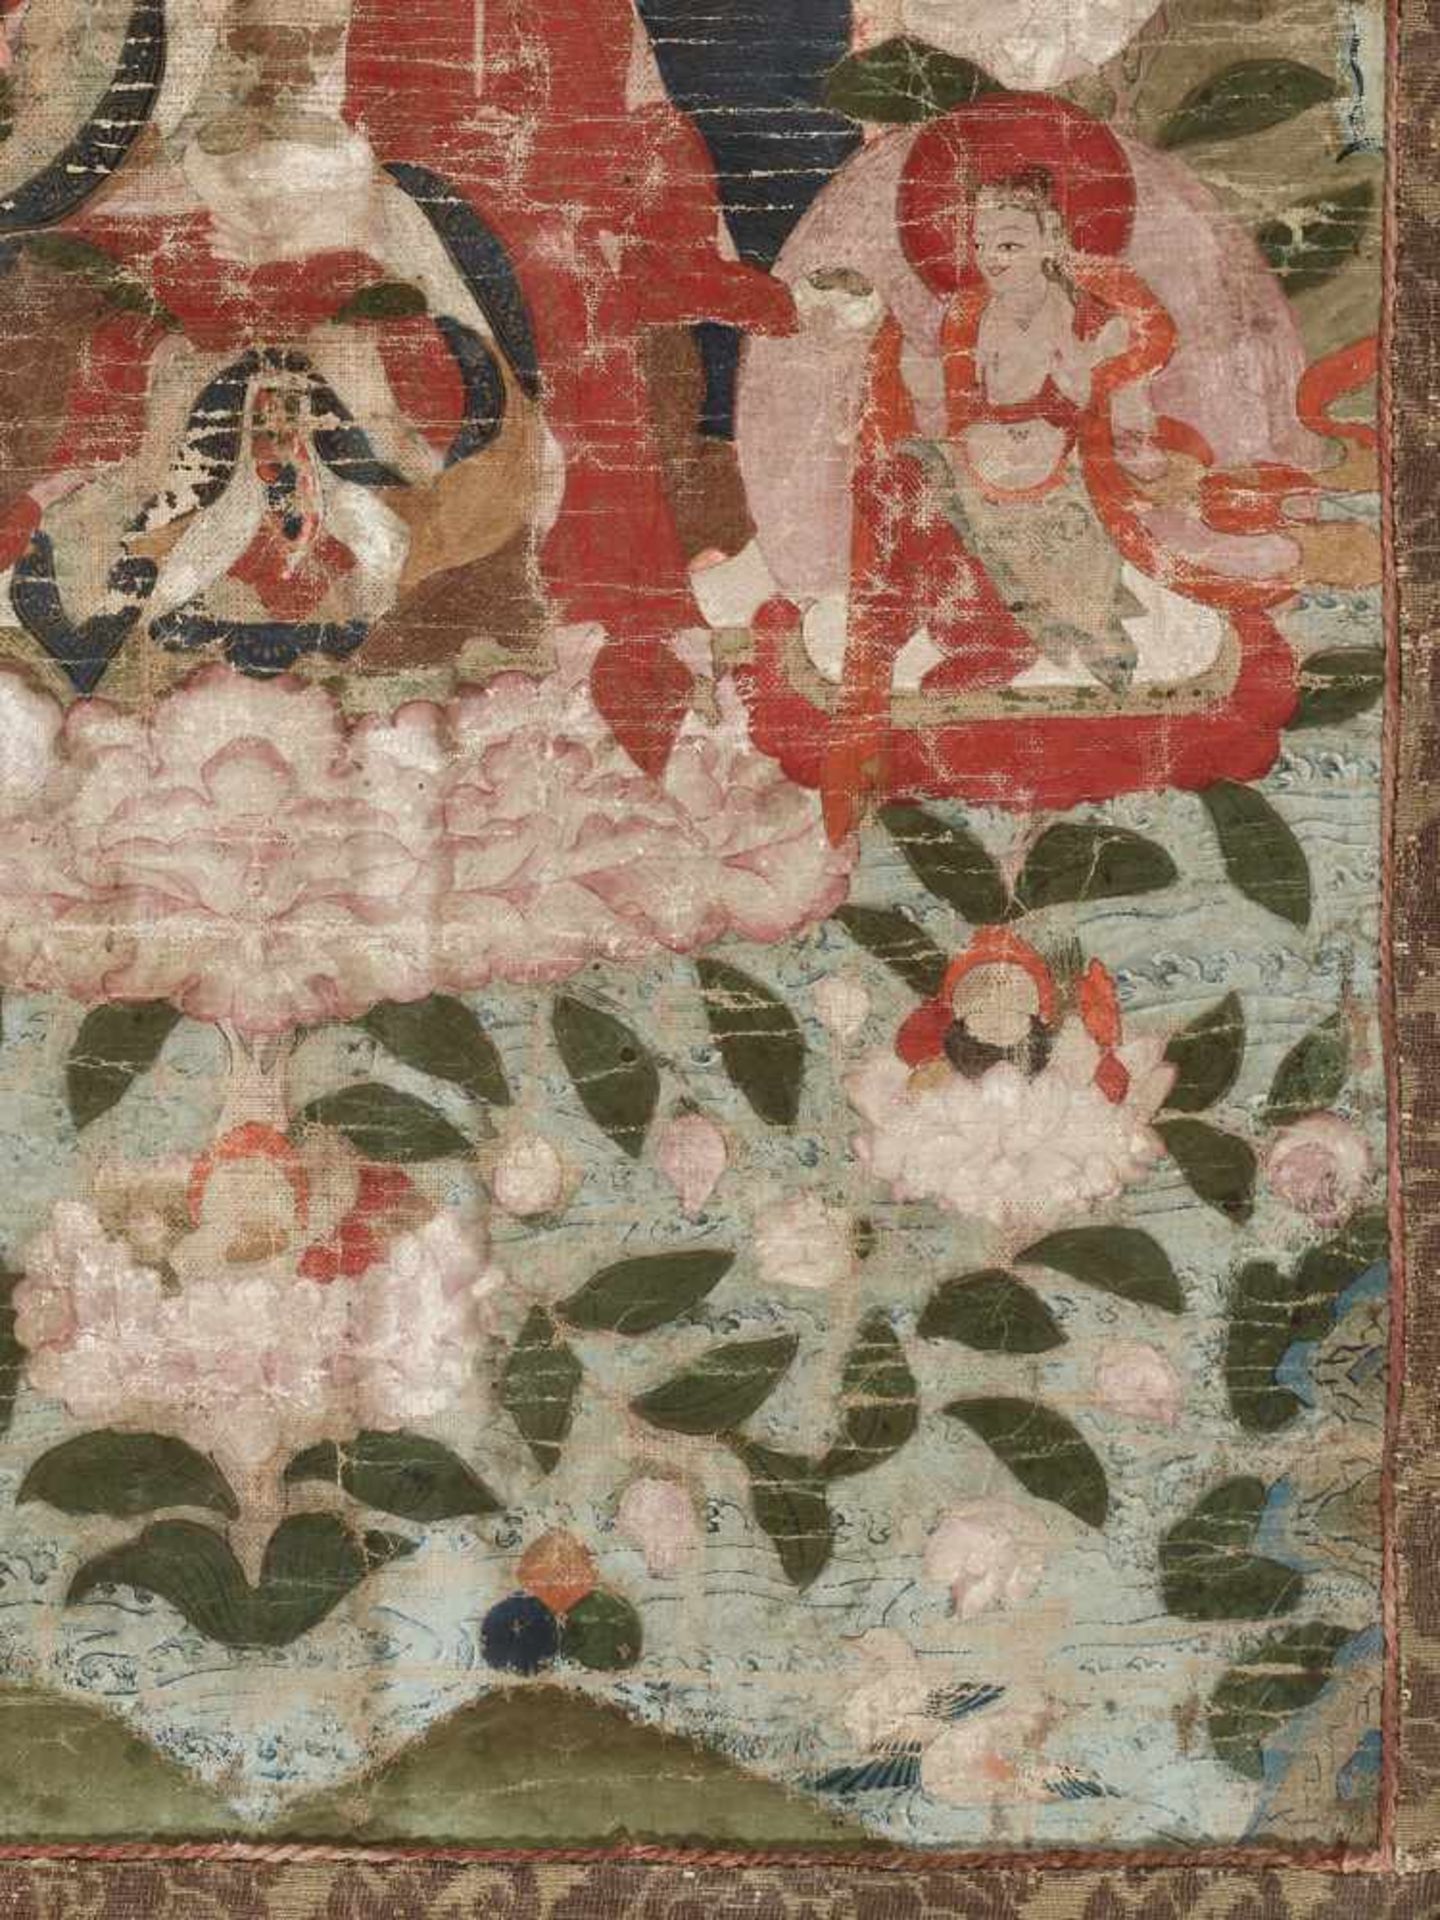 AN 18th CENTURY THANGKA OF GURU RINPOCHE IN ZANGDOK PALRIDistemper and gold paint on cloth, framed - Image 5 of 11